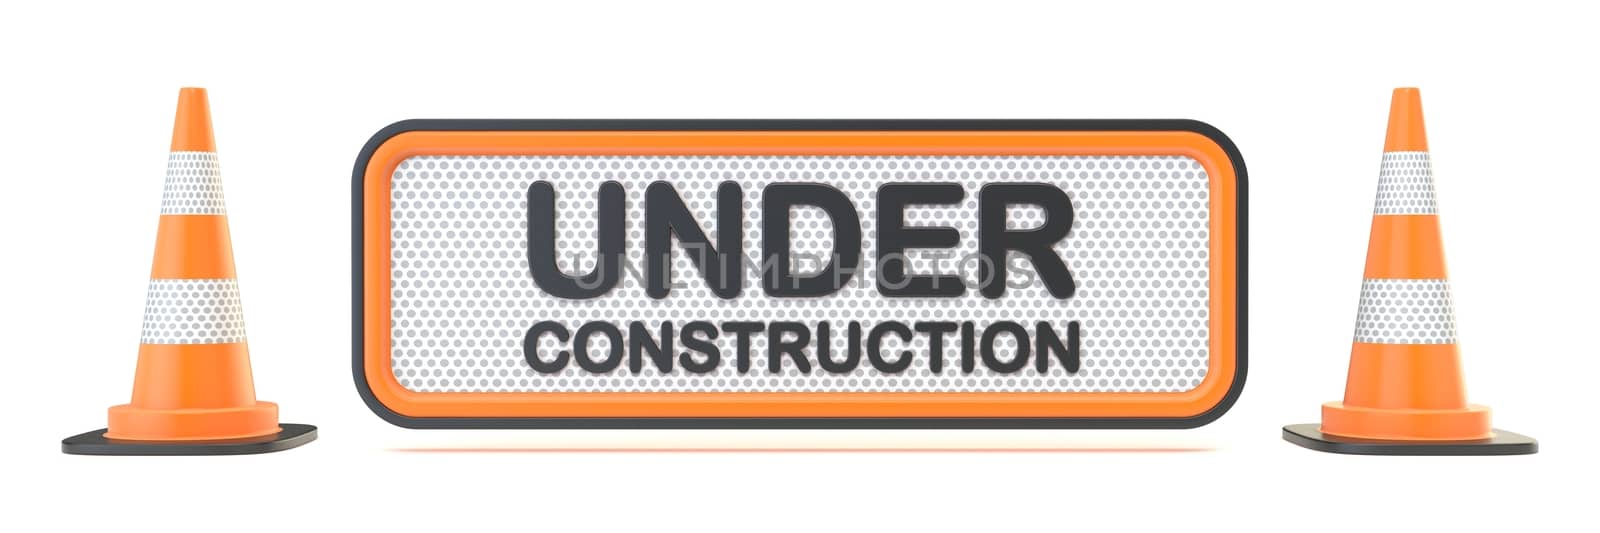 Under construction sign with two traffic cones 3D render illustration isolated on white background